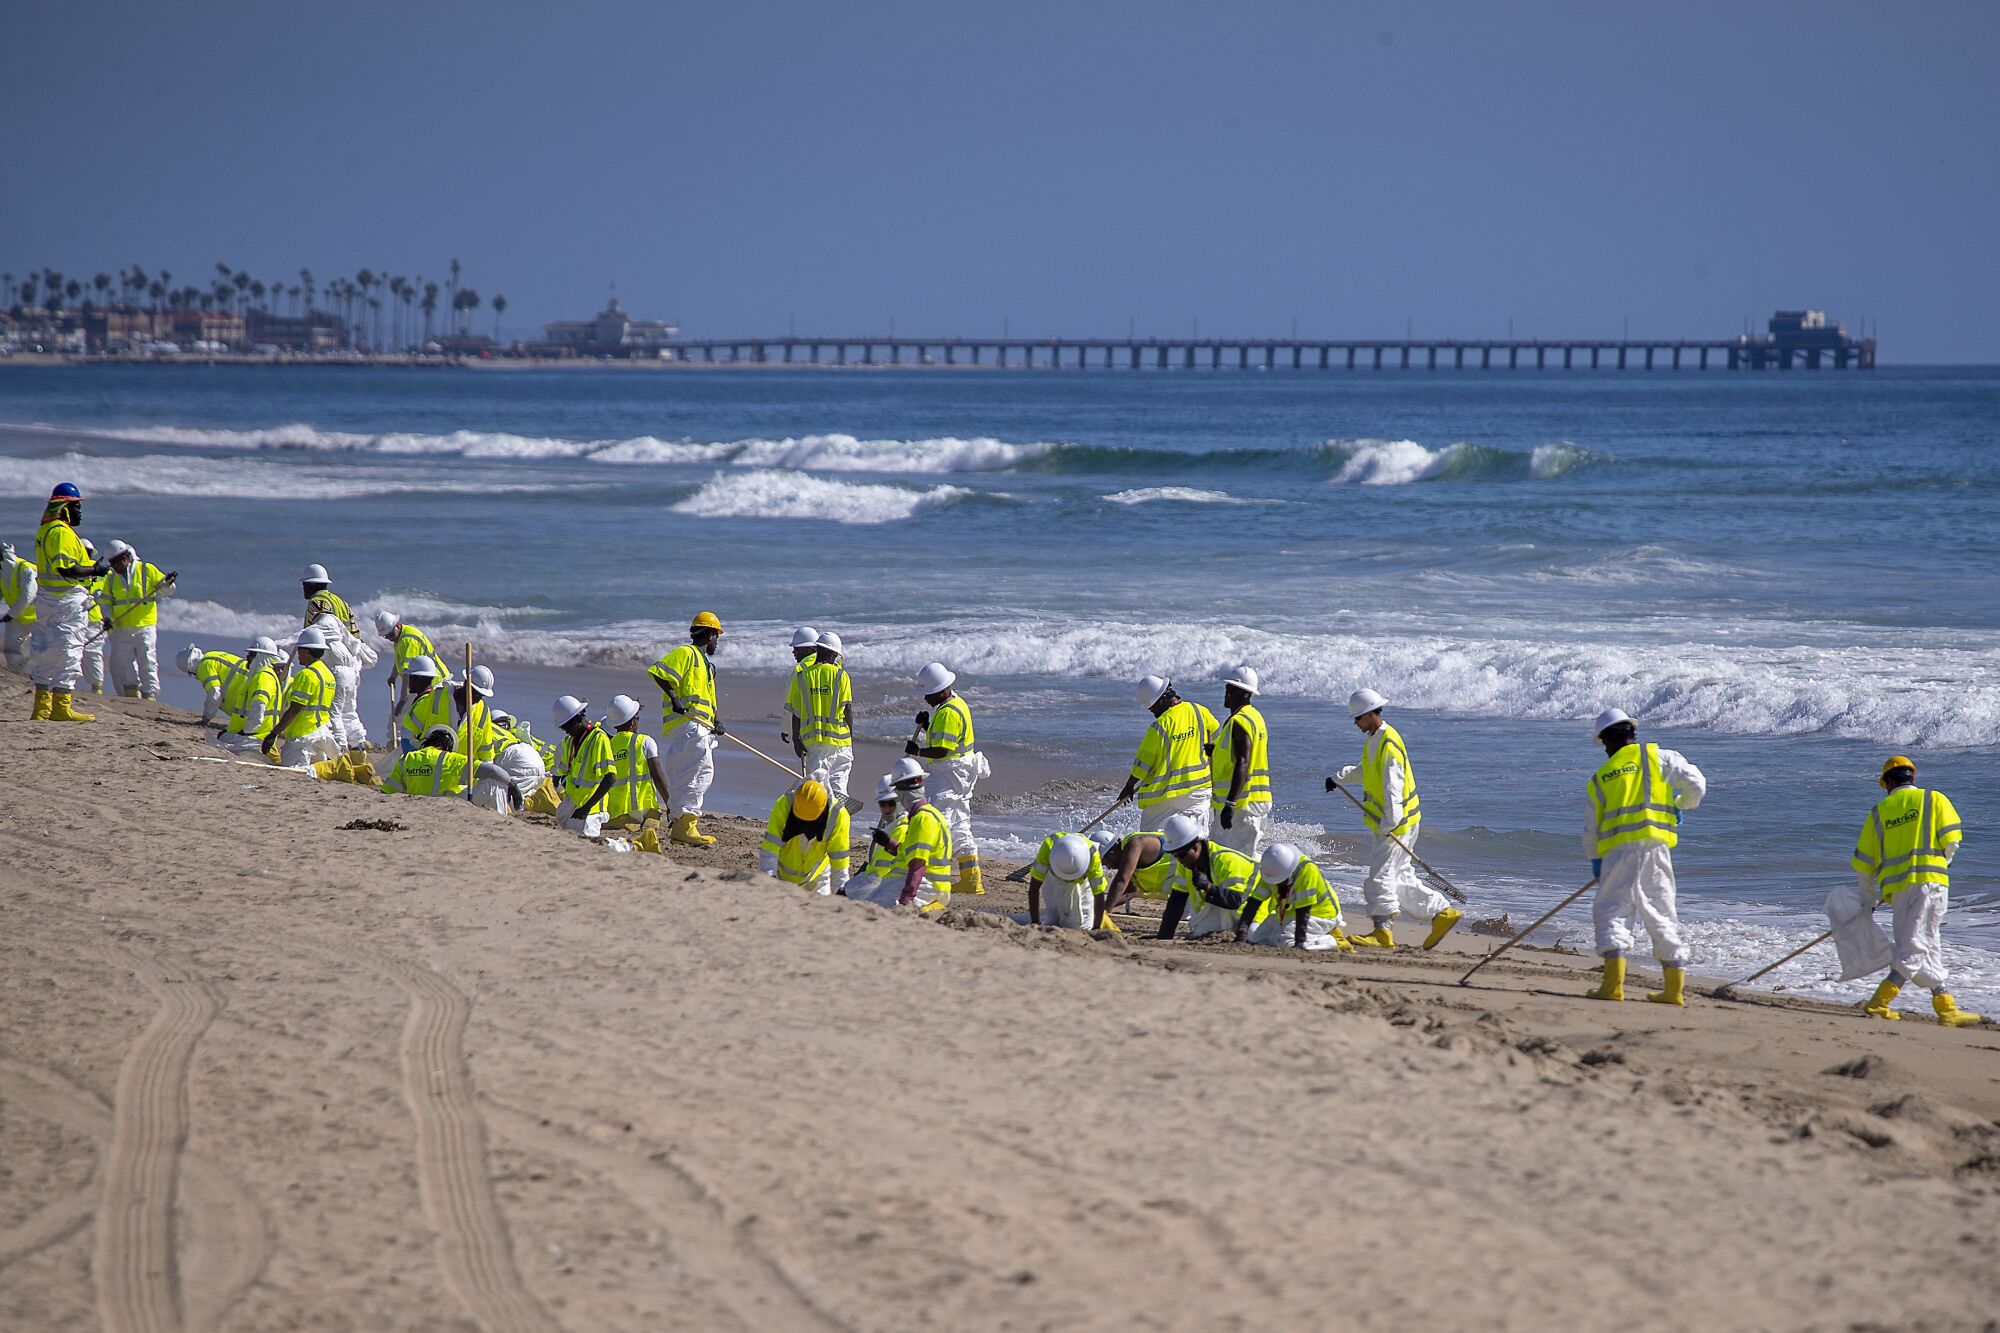 Cleanup crews in yellow vests on the beach